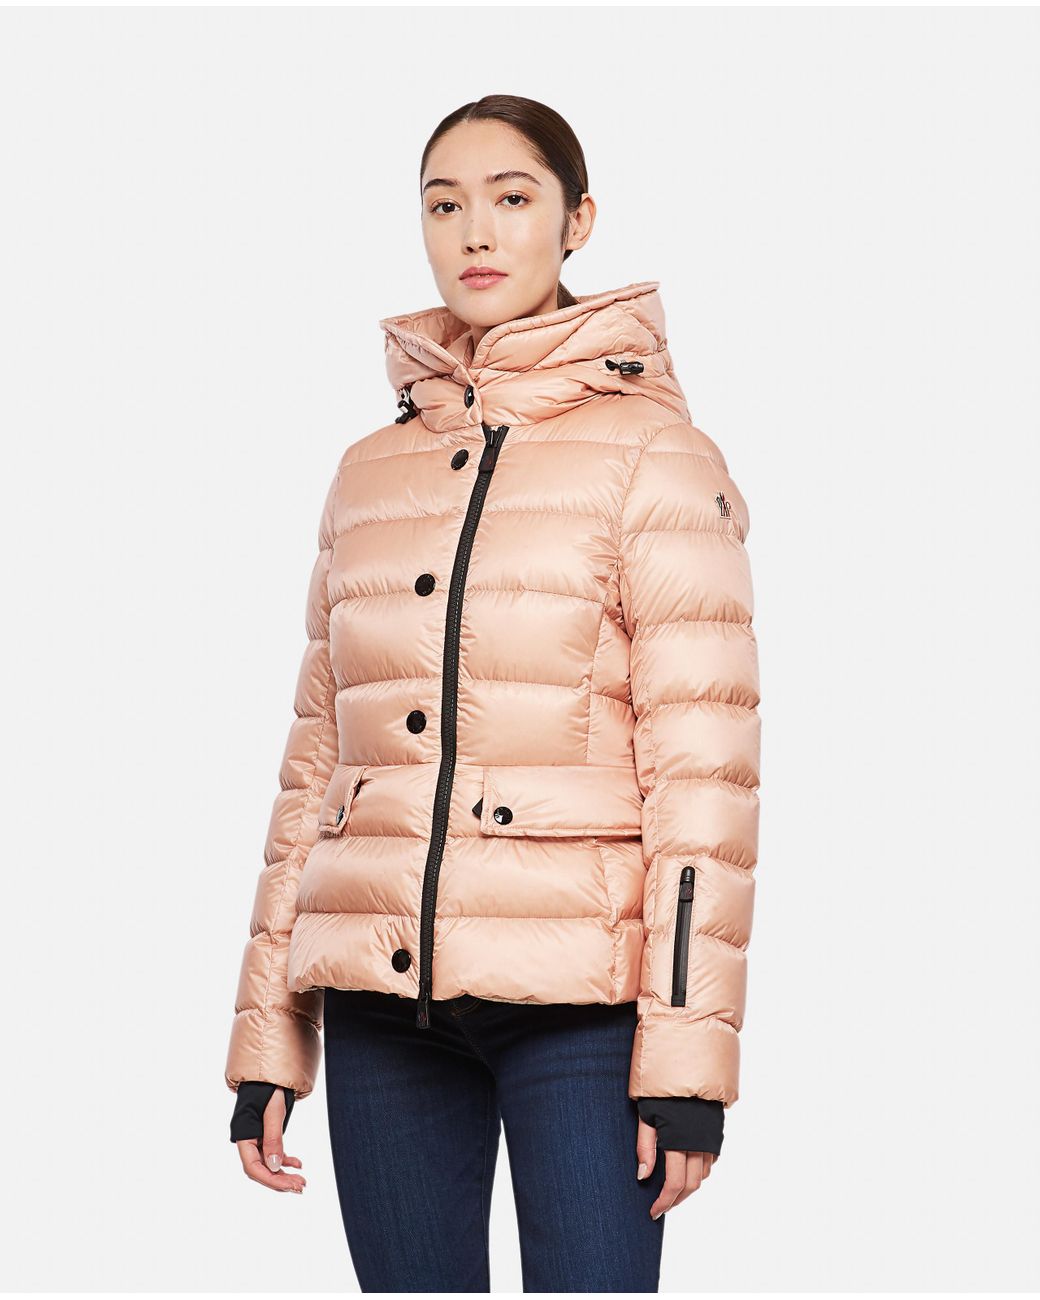 3 MONCLER GRENOBLE Armonique Nylon Down Jacket in Natural | Lyst